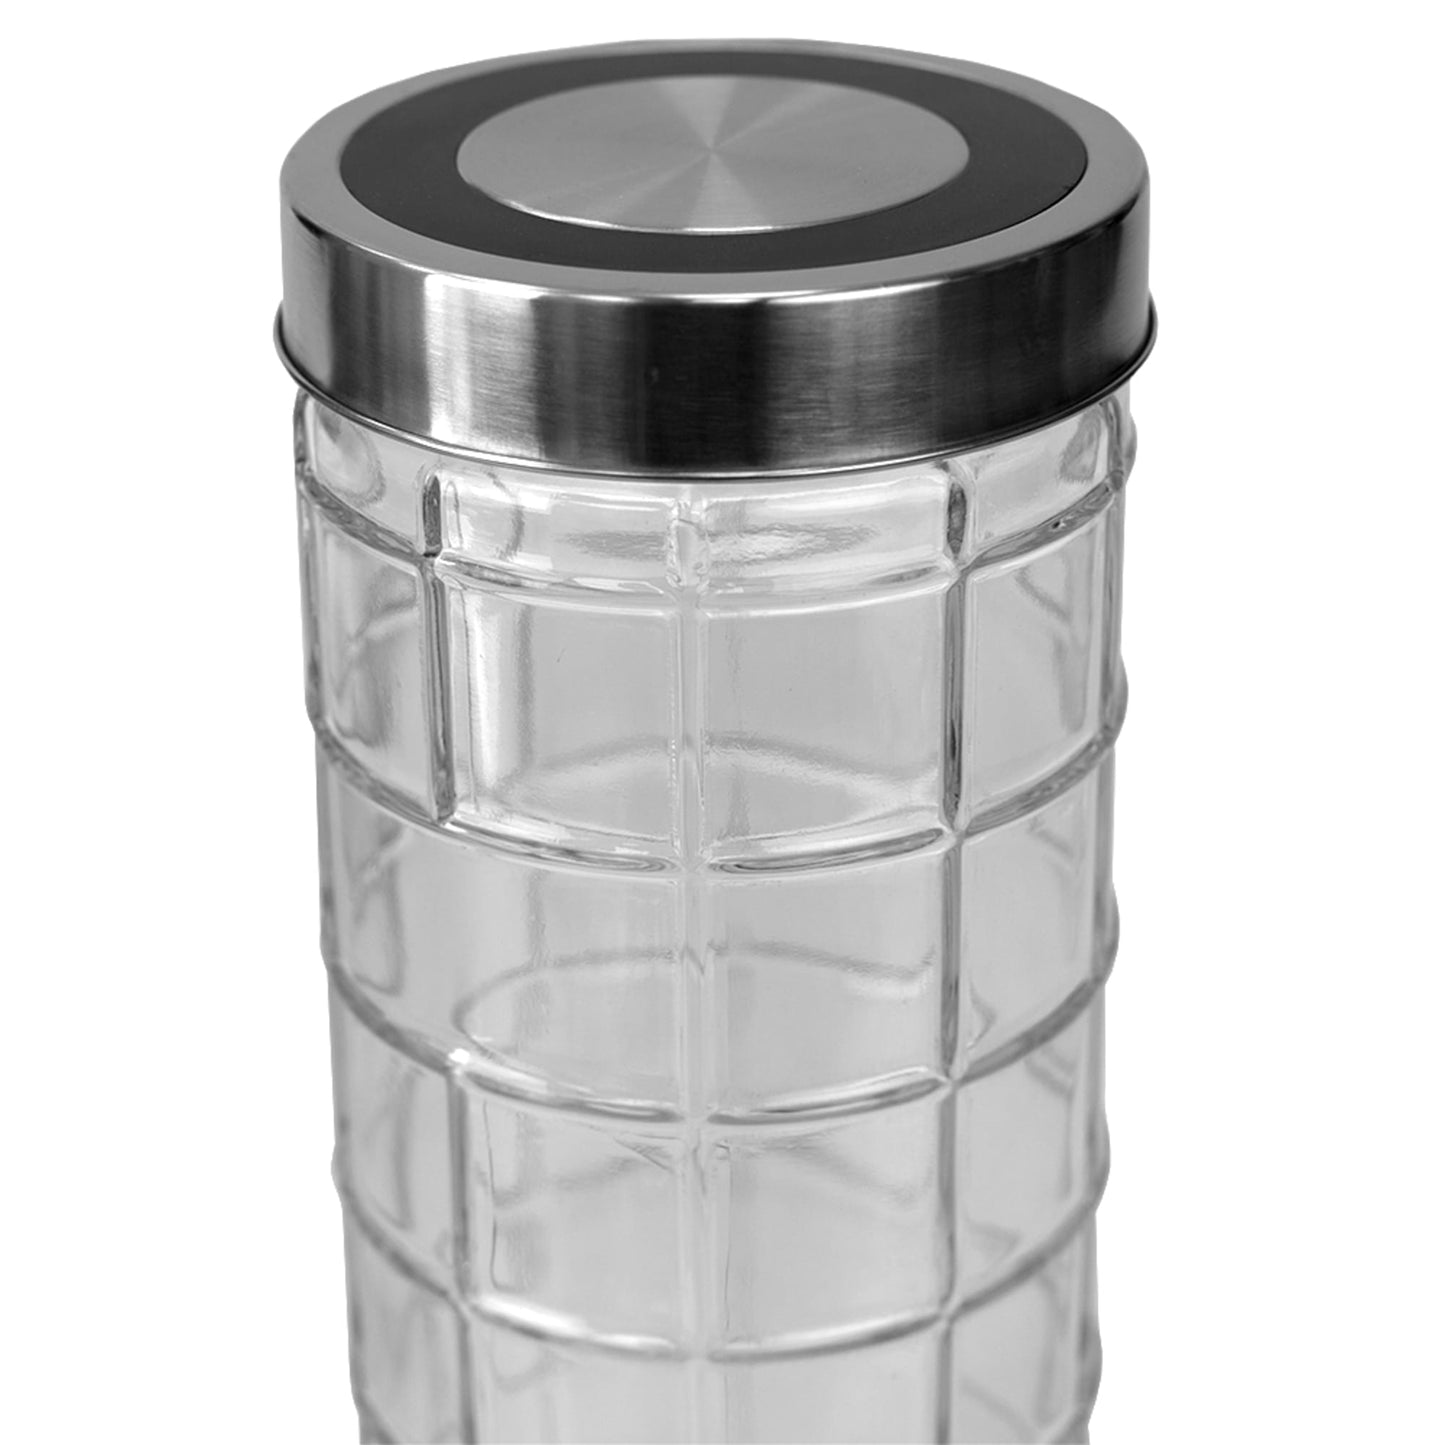 Chex Collection 66 oz. X-Large Glass Canister with Stainless Steel Lid